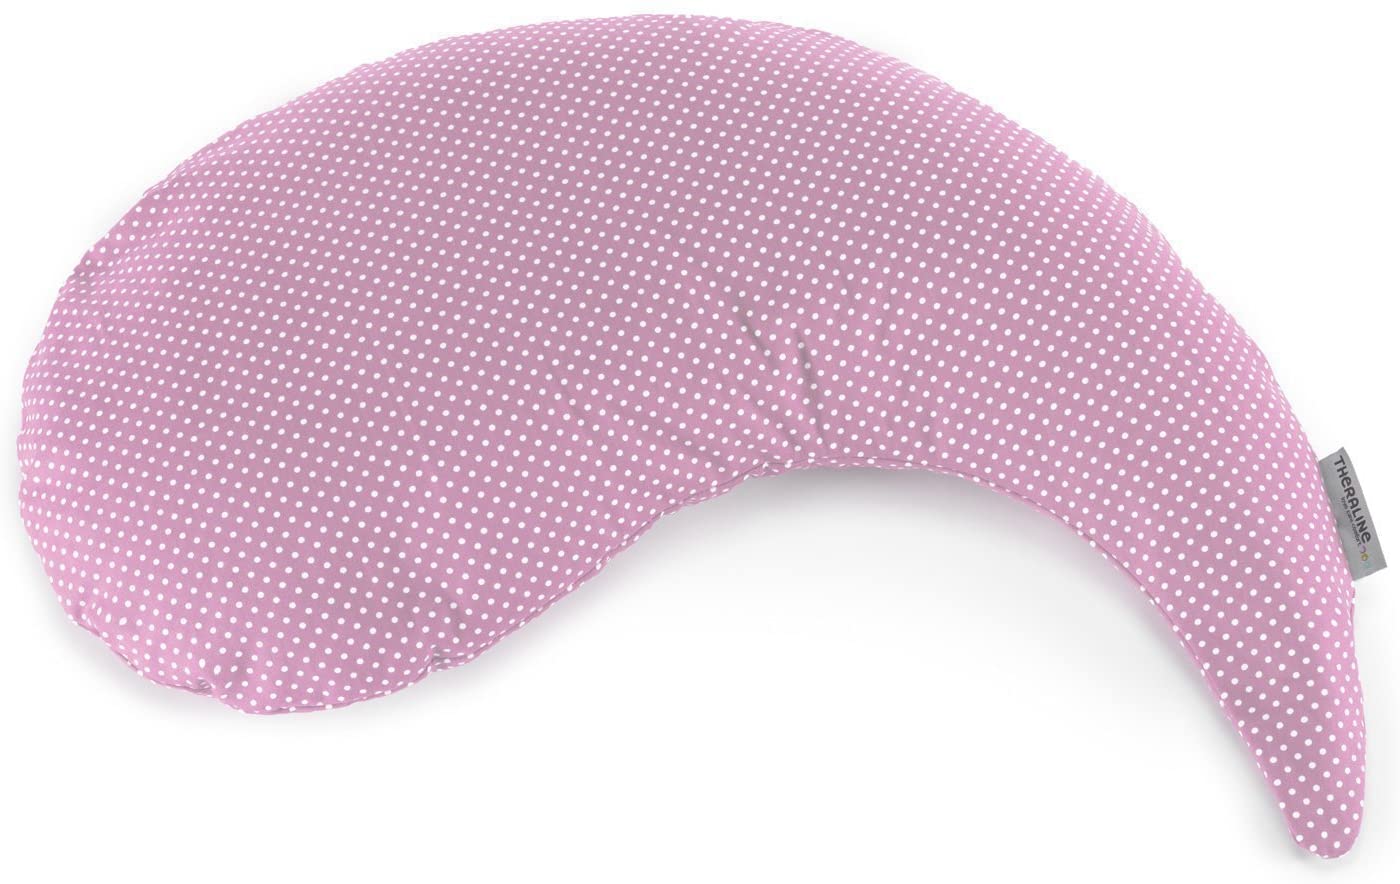 Theraline Yinnie Nursing Pillow with Outer Cover Dots Lilac